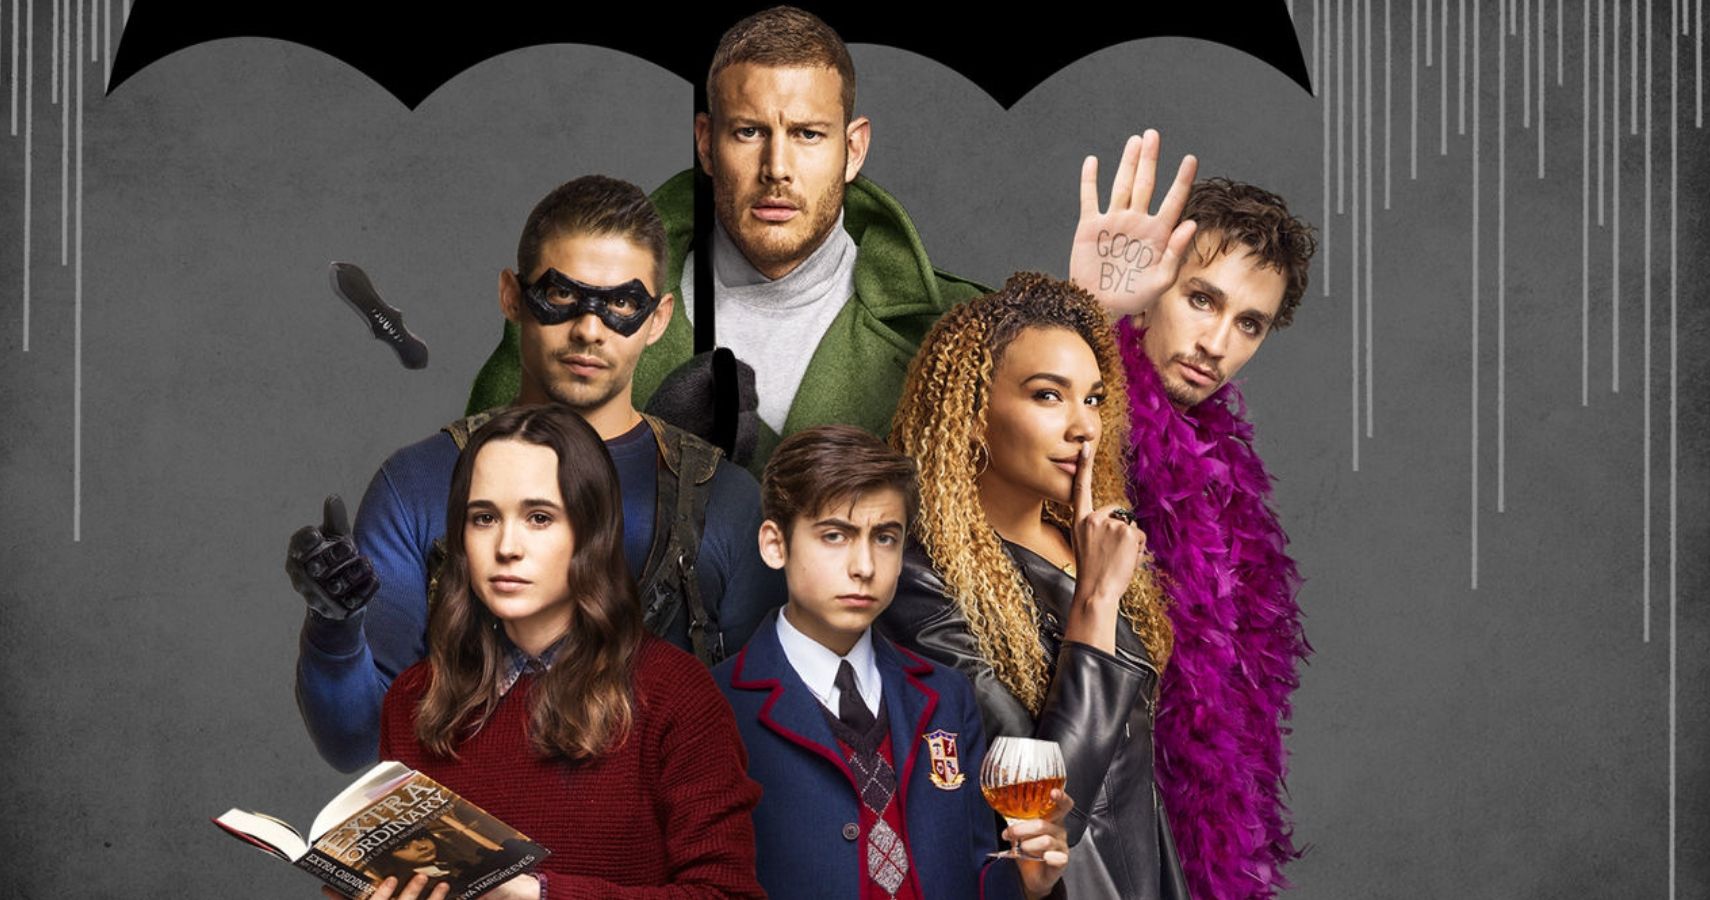 The Umbrella Academy: 10 Best Klaus Hargreeves Quotes